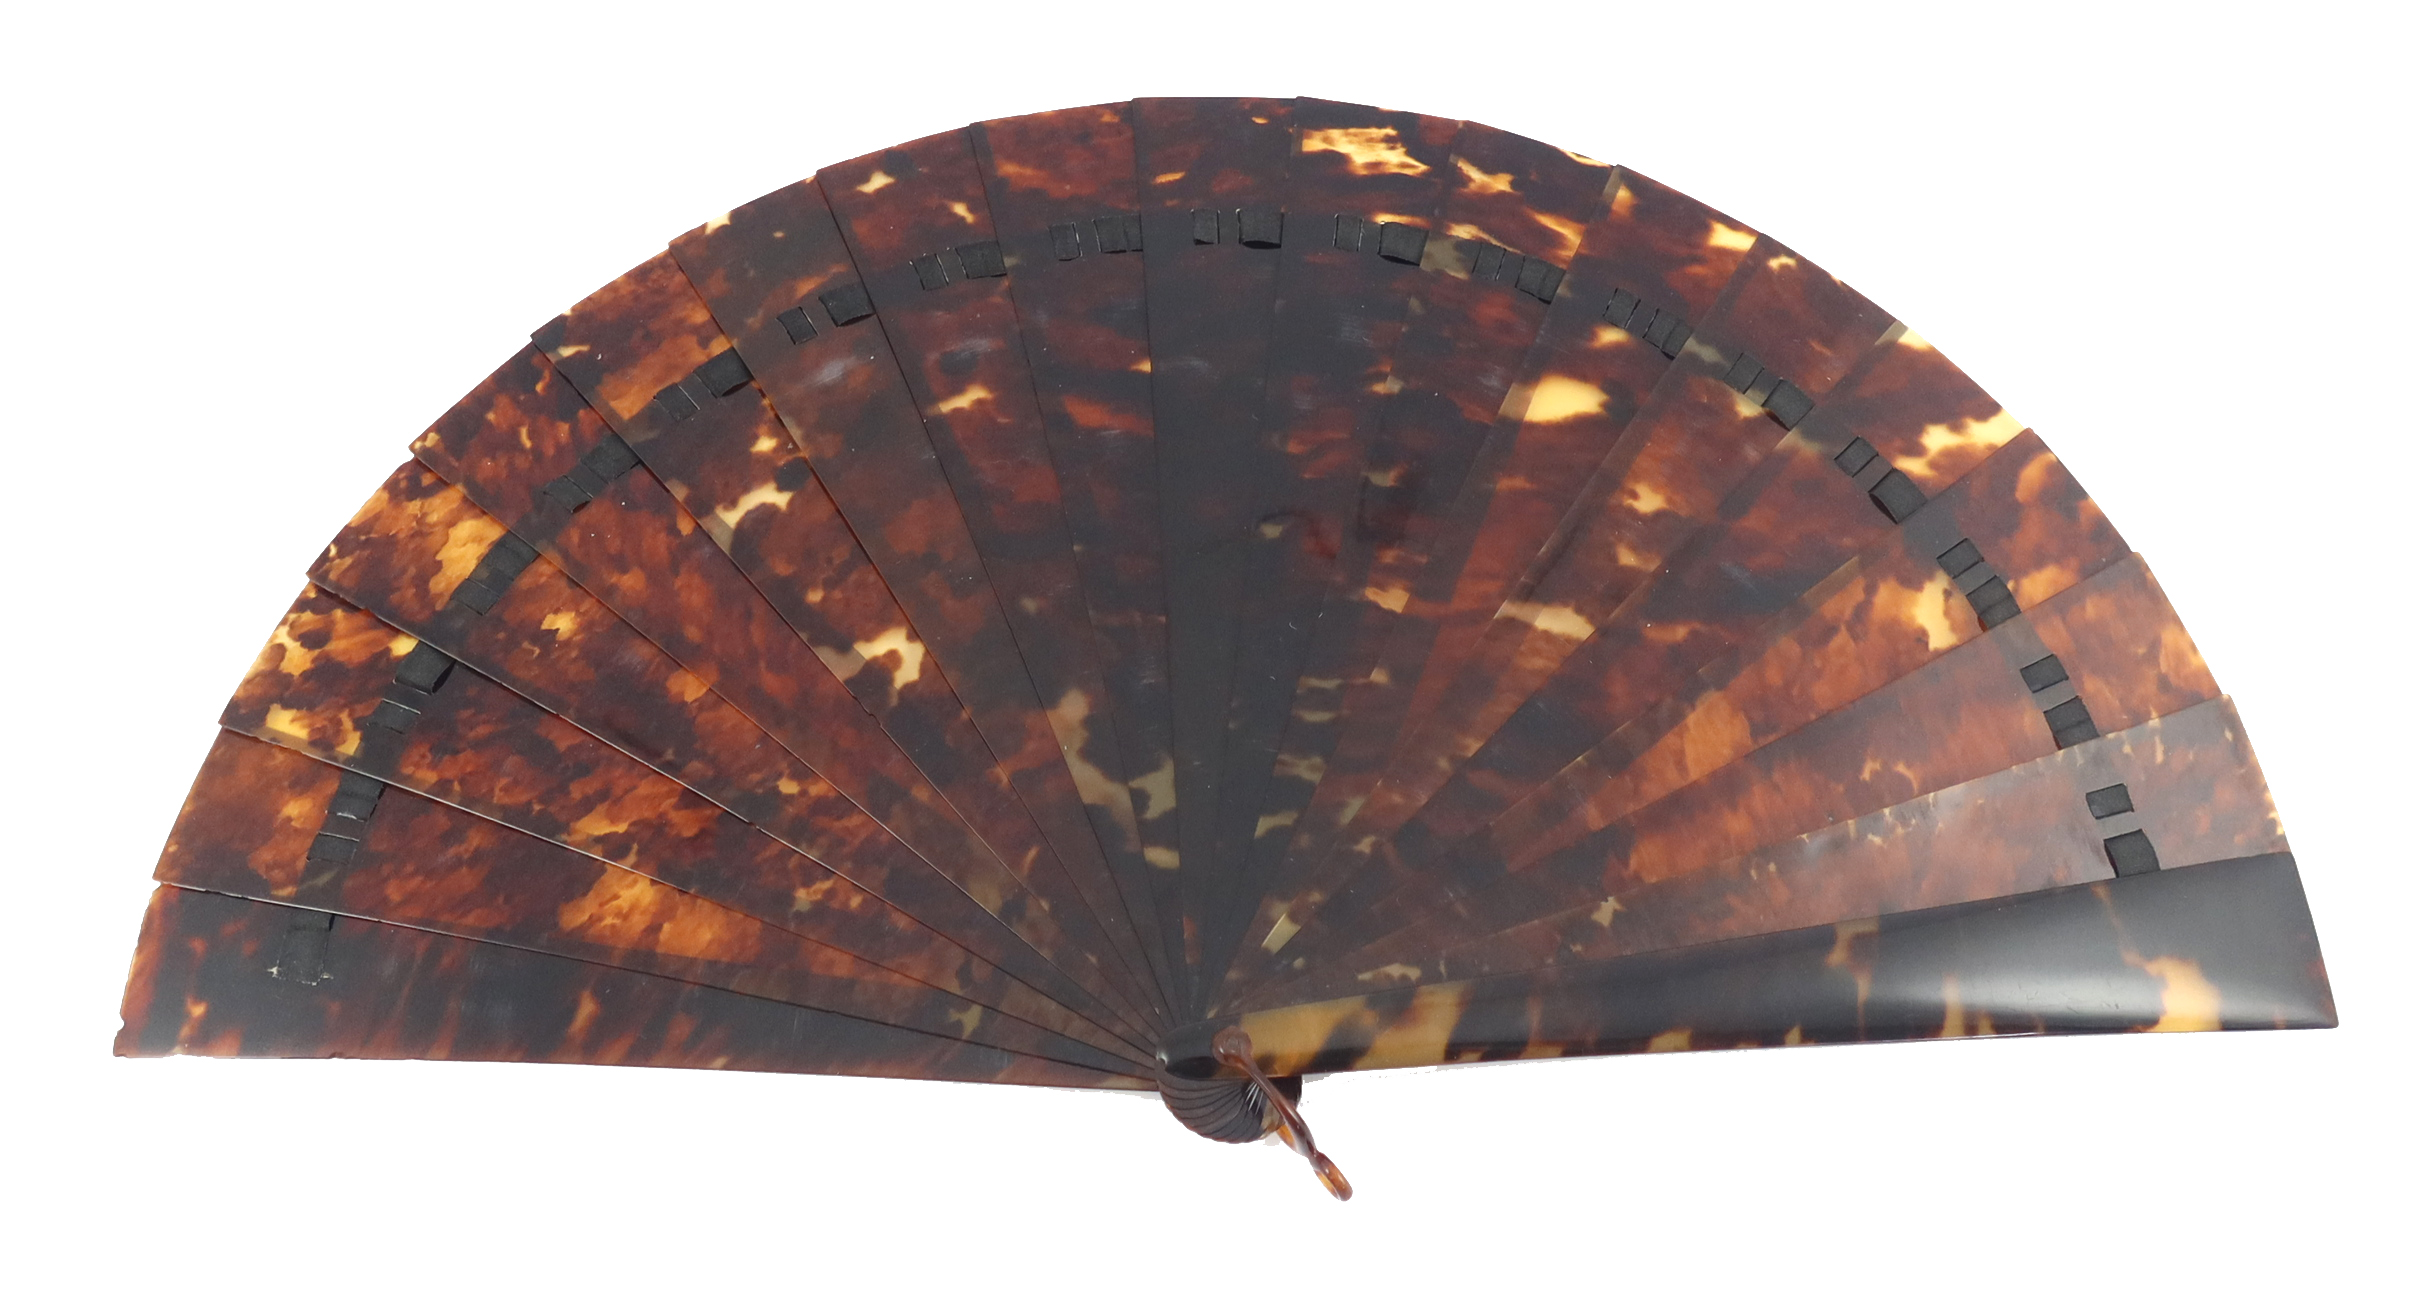 A simple tortoiseshell brisé fan, the guards and sticks wedge-shaped, fitted with a tortoiseshell lo